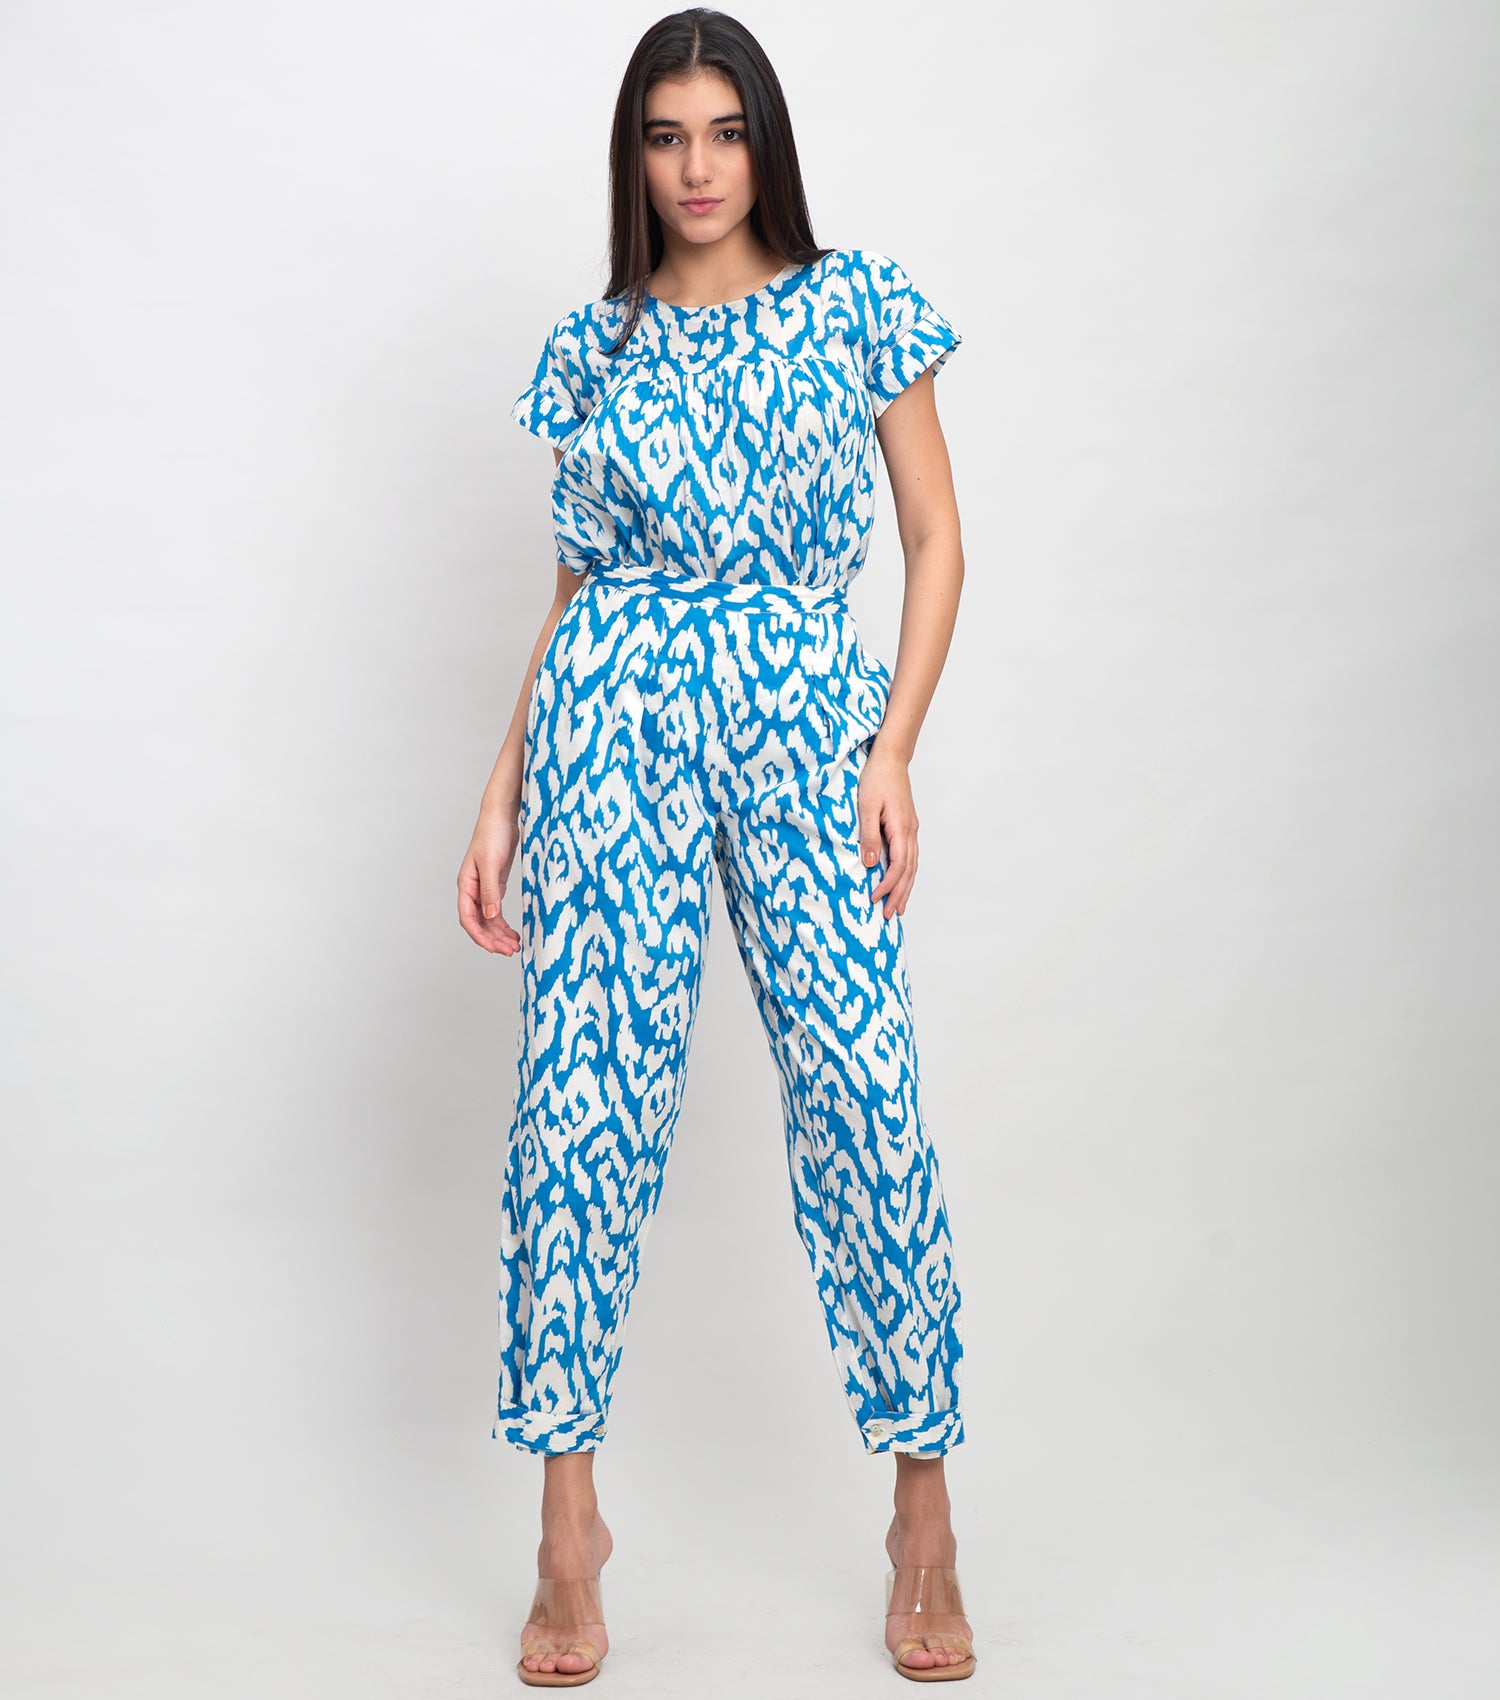 Sky Blue Cotton Elasticated Printed Pant with Adjustable Band At The Bottom